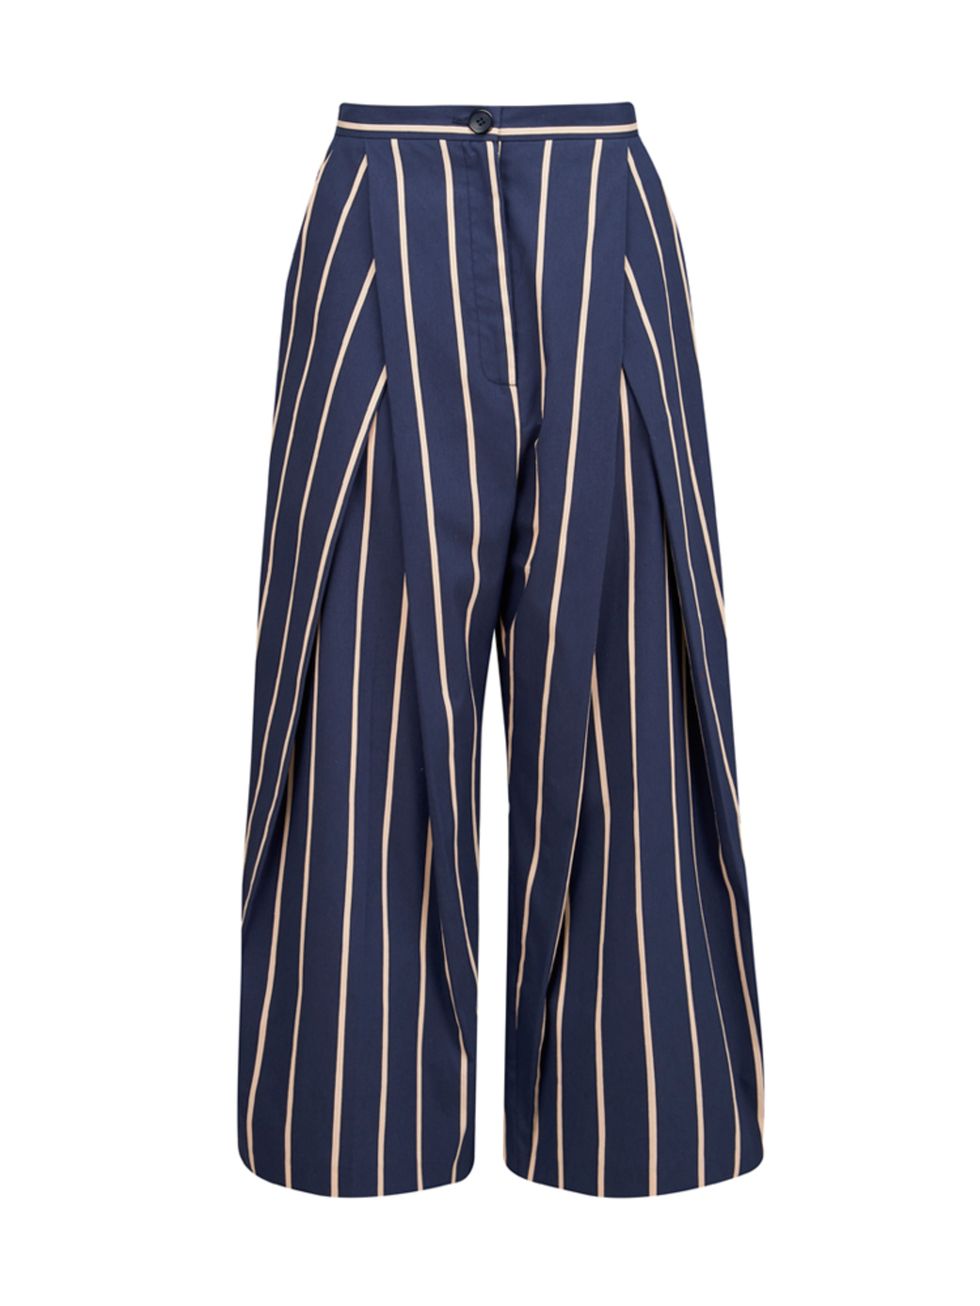 <p>Fashion Intern Emi will pair these trousers with an off-the-shoulder top to beat the heat. </p>

<p><a href="http://www.atterley.com/blue-stripe-cotton-trousers-1.html" target="_blank">Atterley</a> trousers, £48</p>